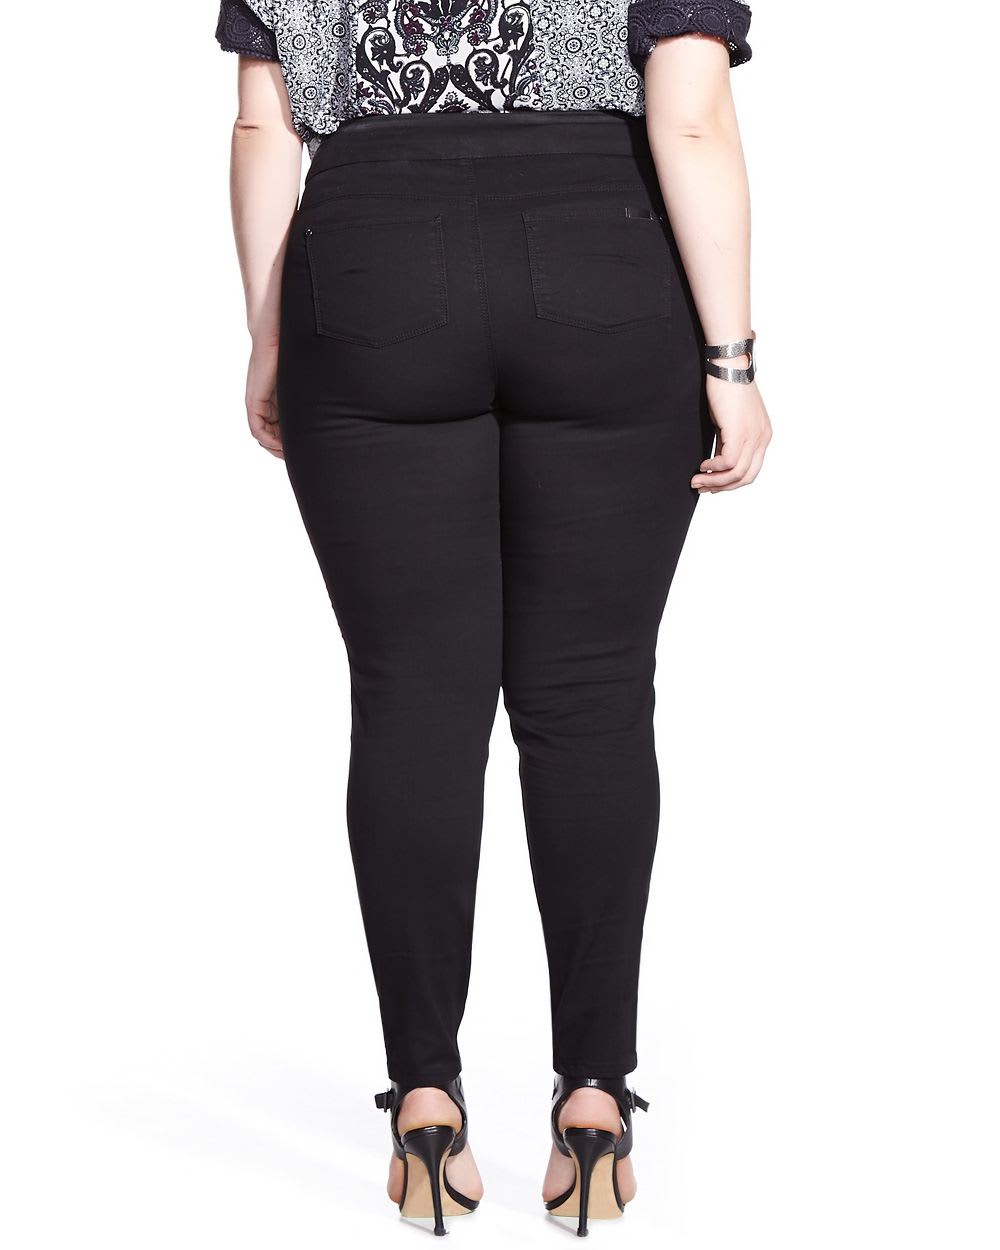 Jean Leggings Plus Size  International Society of Precision Agriculture